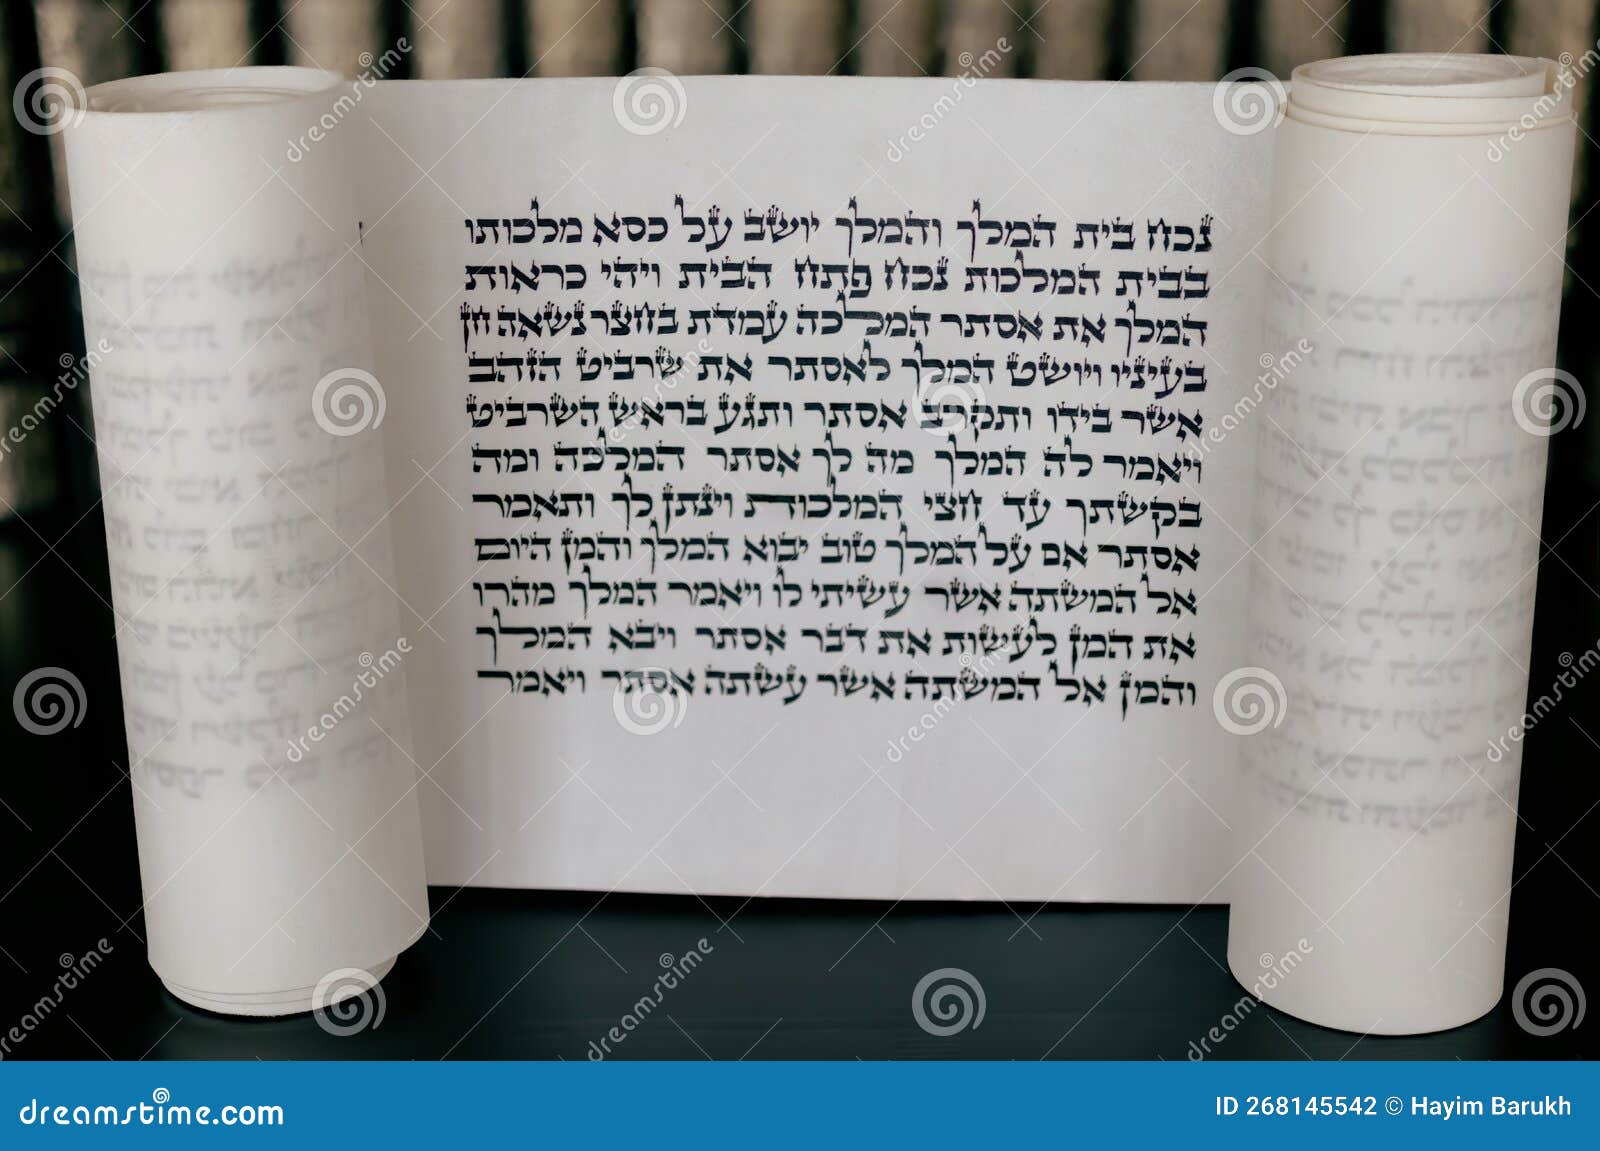 megillat esther (book of esther)  scroll on black backround and talmud.